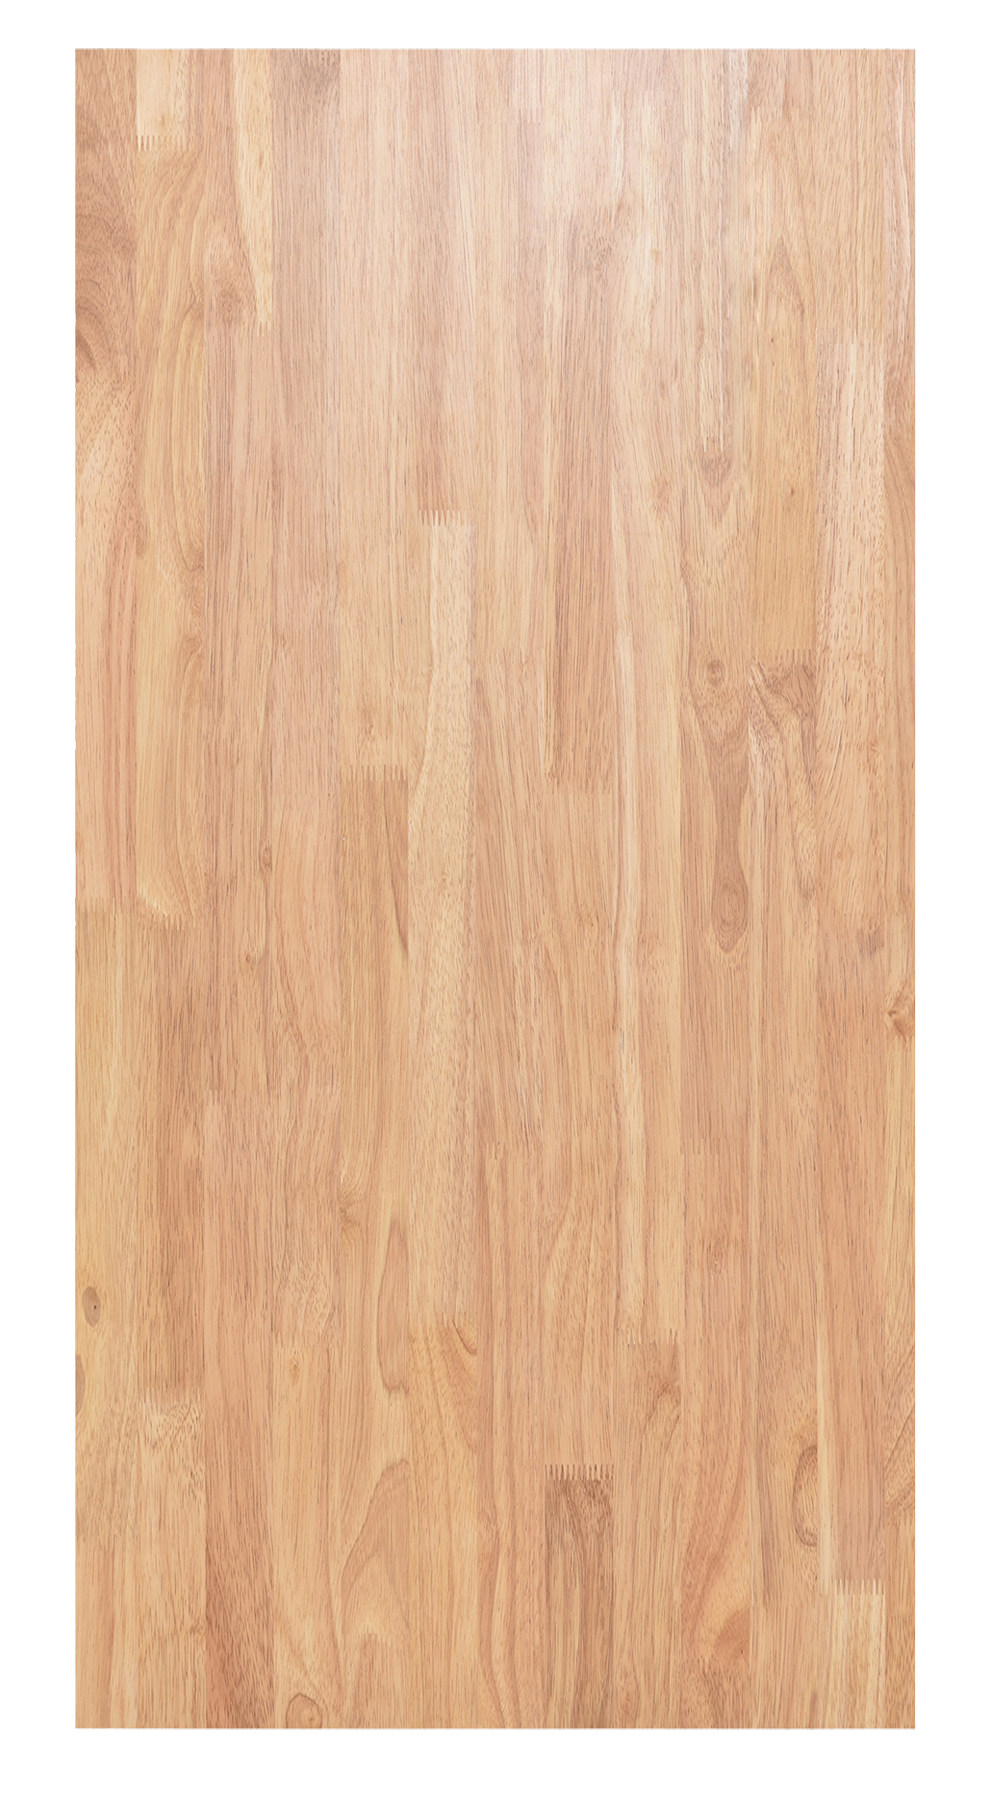 TOP TABLE TIMBER 1500MM X 700MM NATURAL